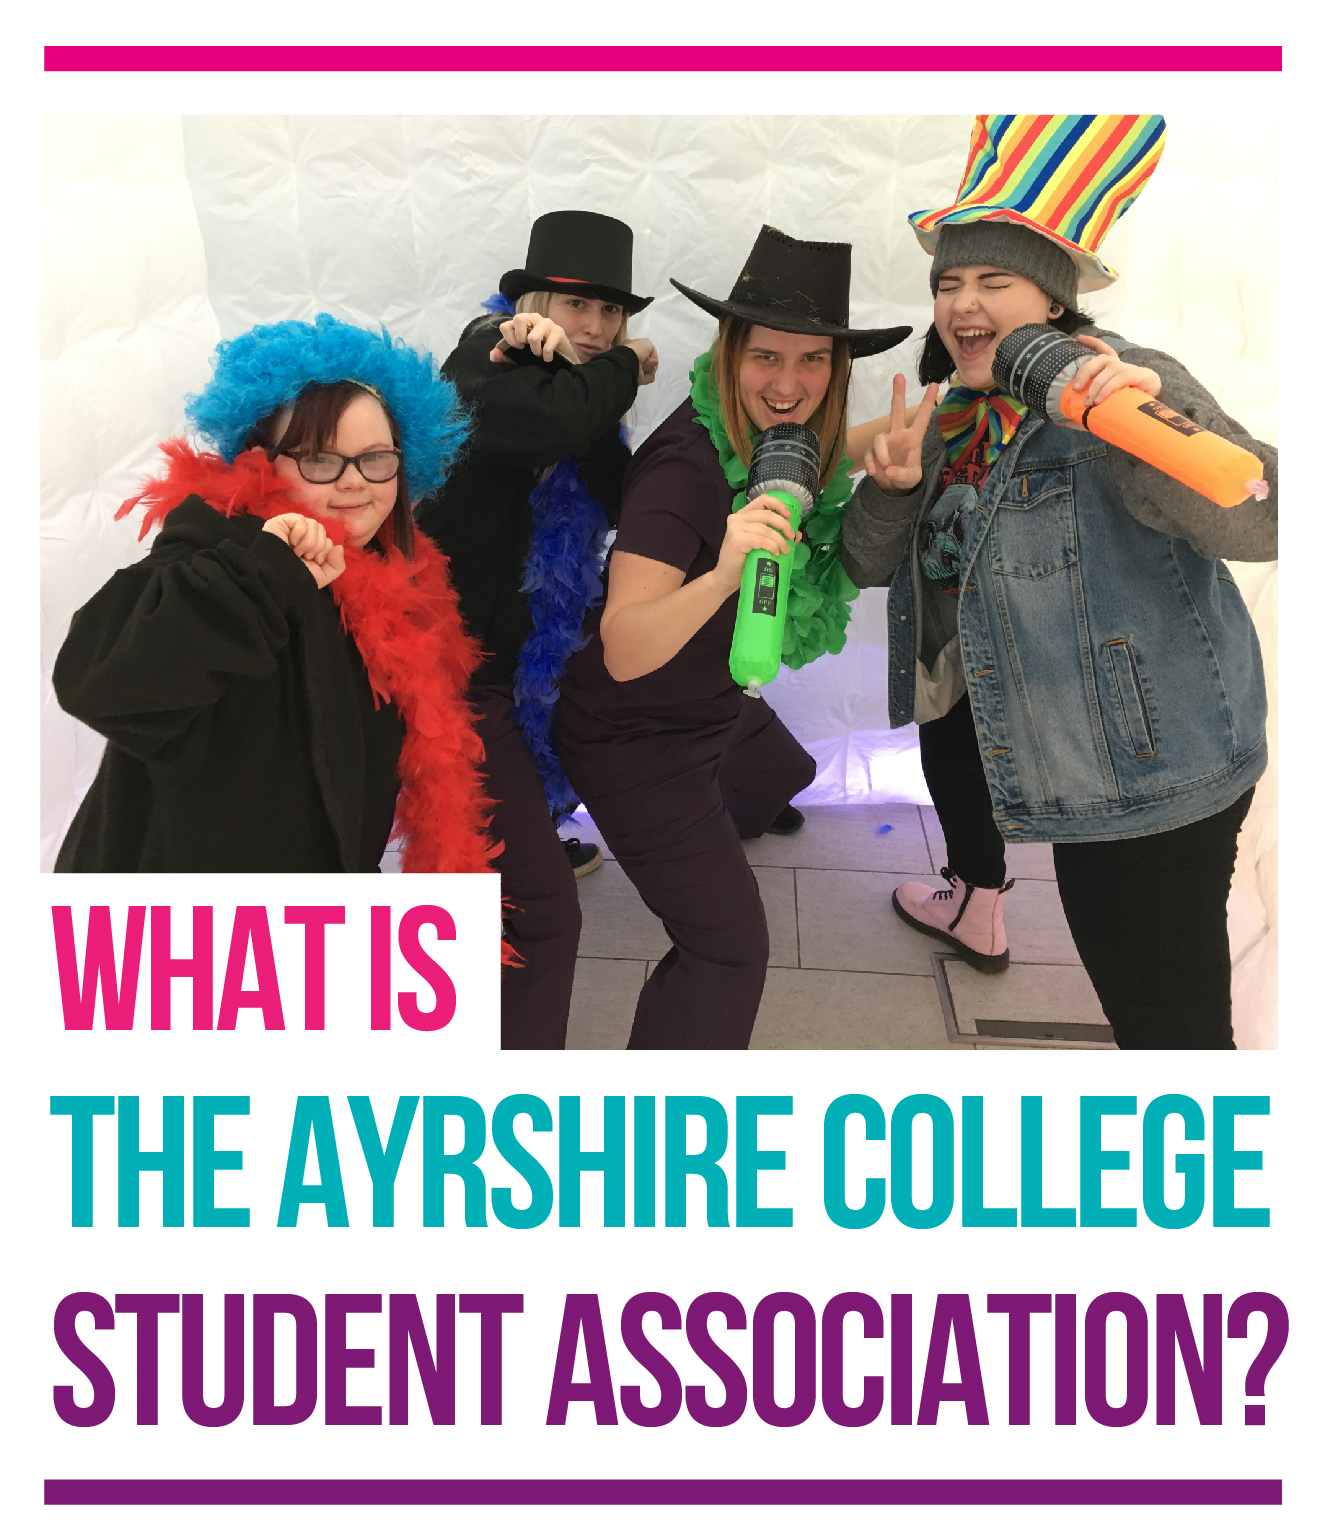 What is Ayrshire College Student Association image 3.jpg